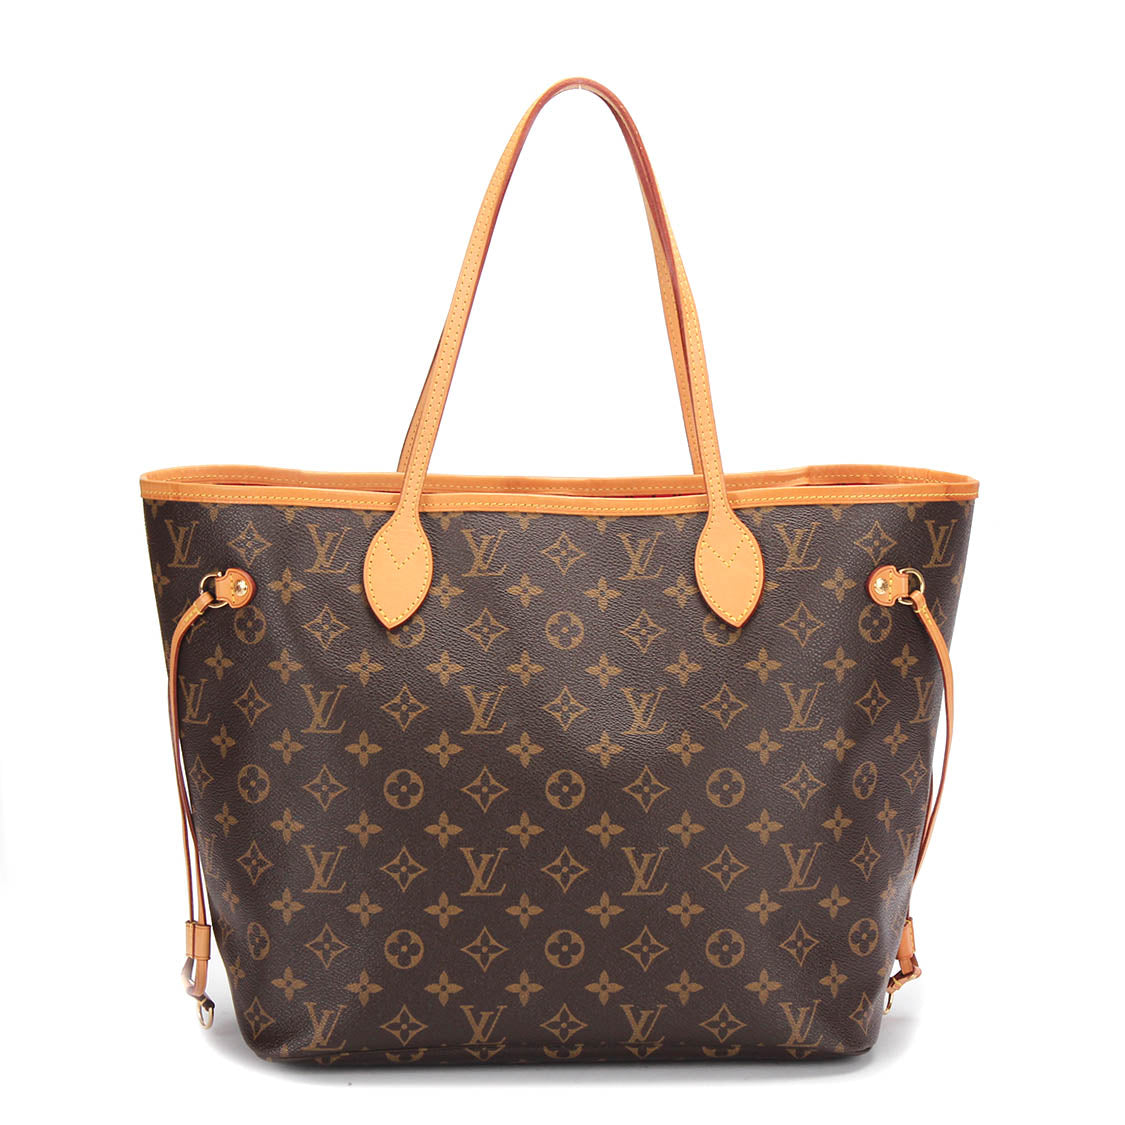 Louis Vuitton Monogram Neverfull MM with Pouch Canvas Tote Bag M41177 in Excellent condition